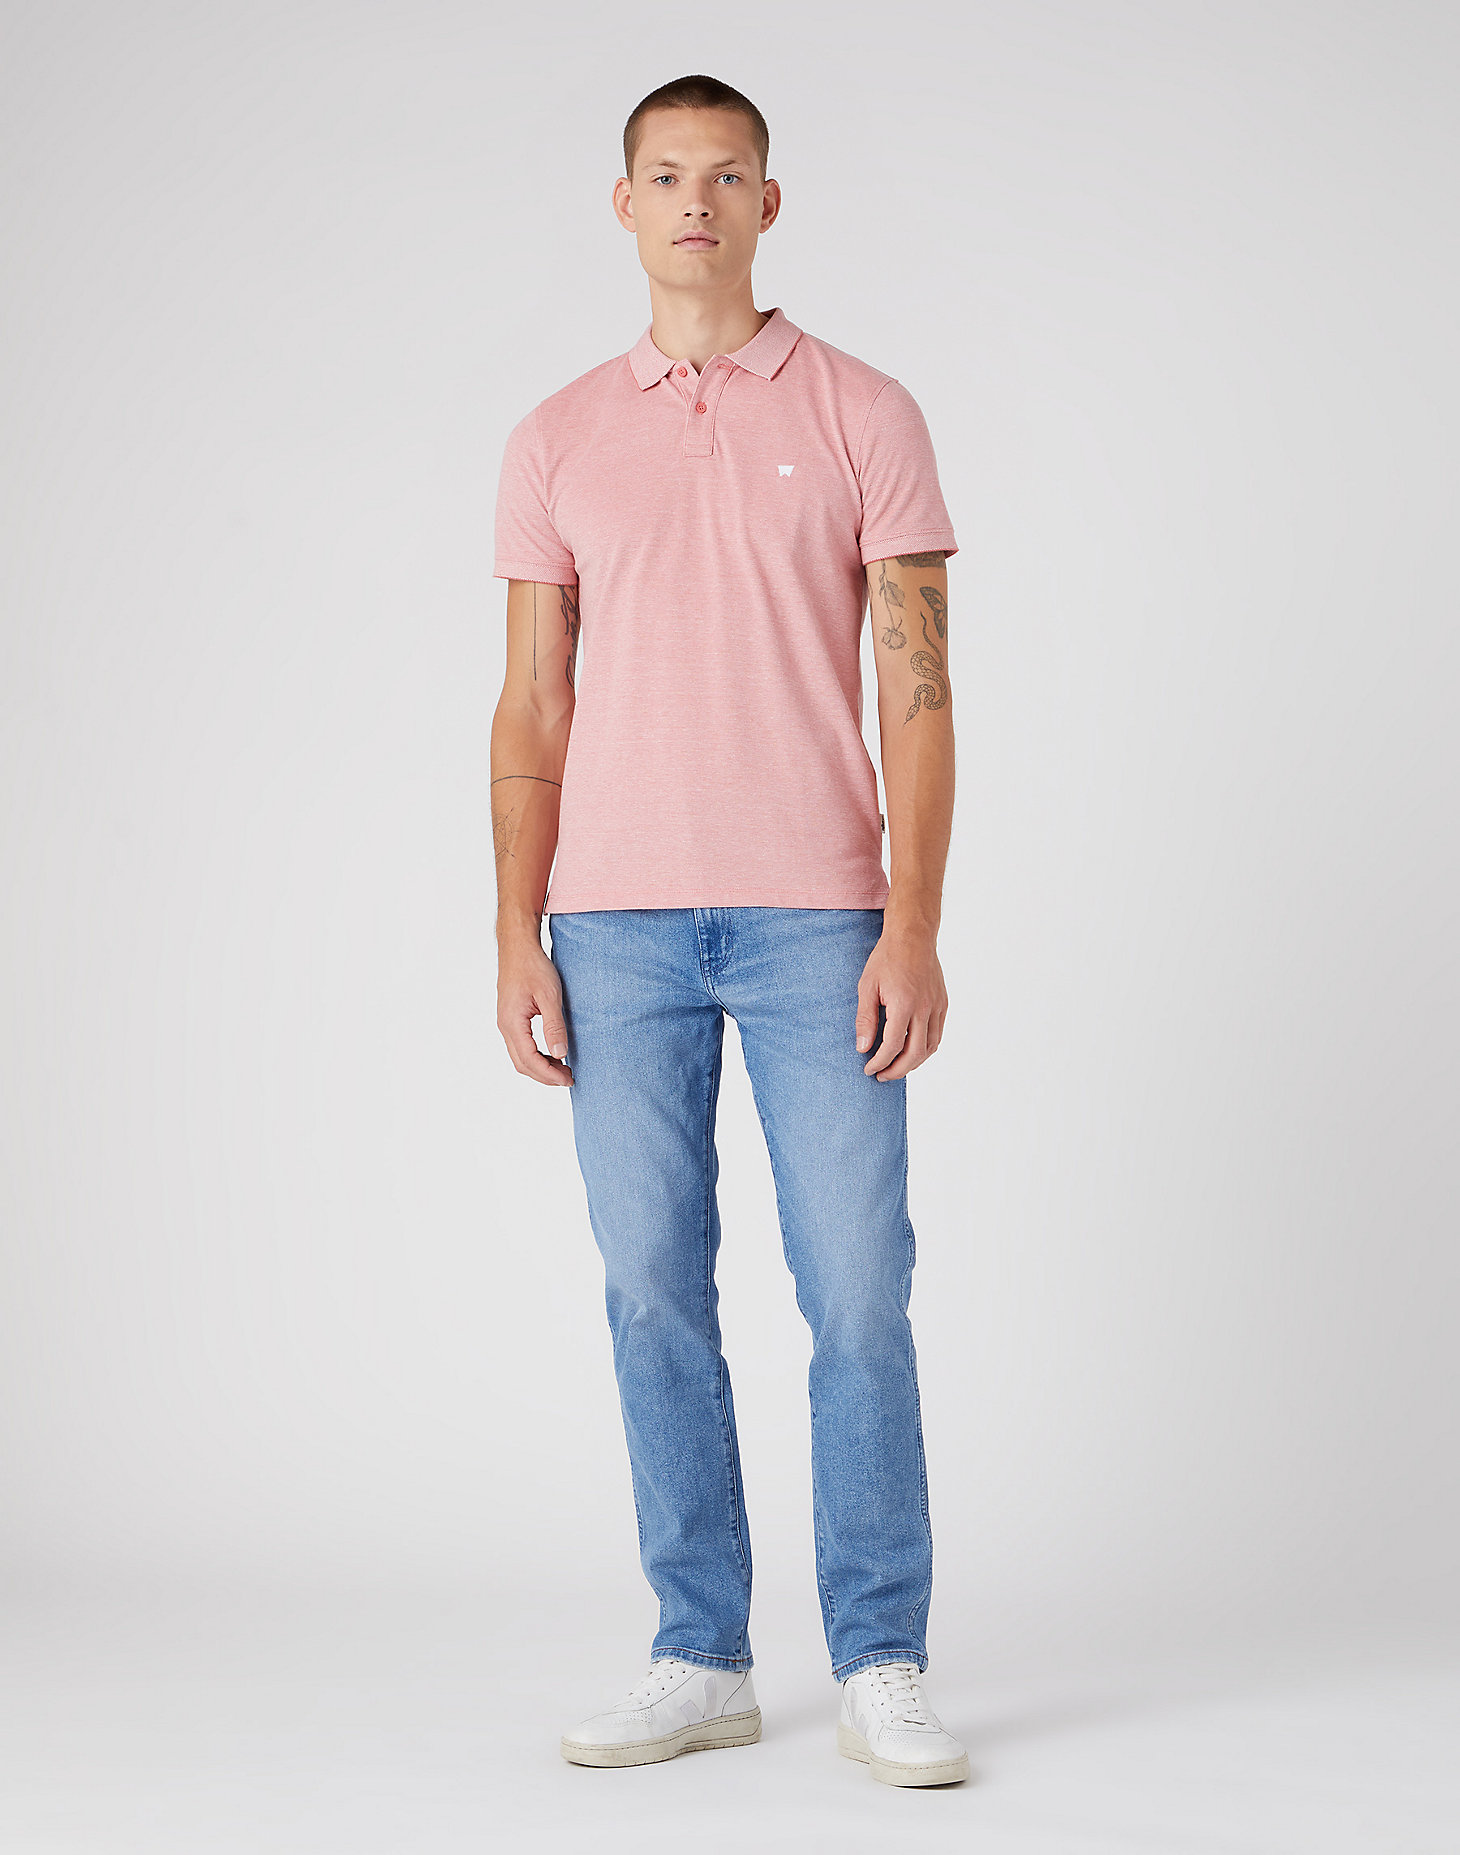 Refined Polo Shirt in Faded Rose alternative view 1